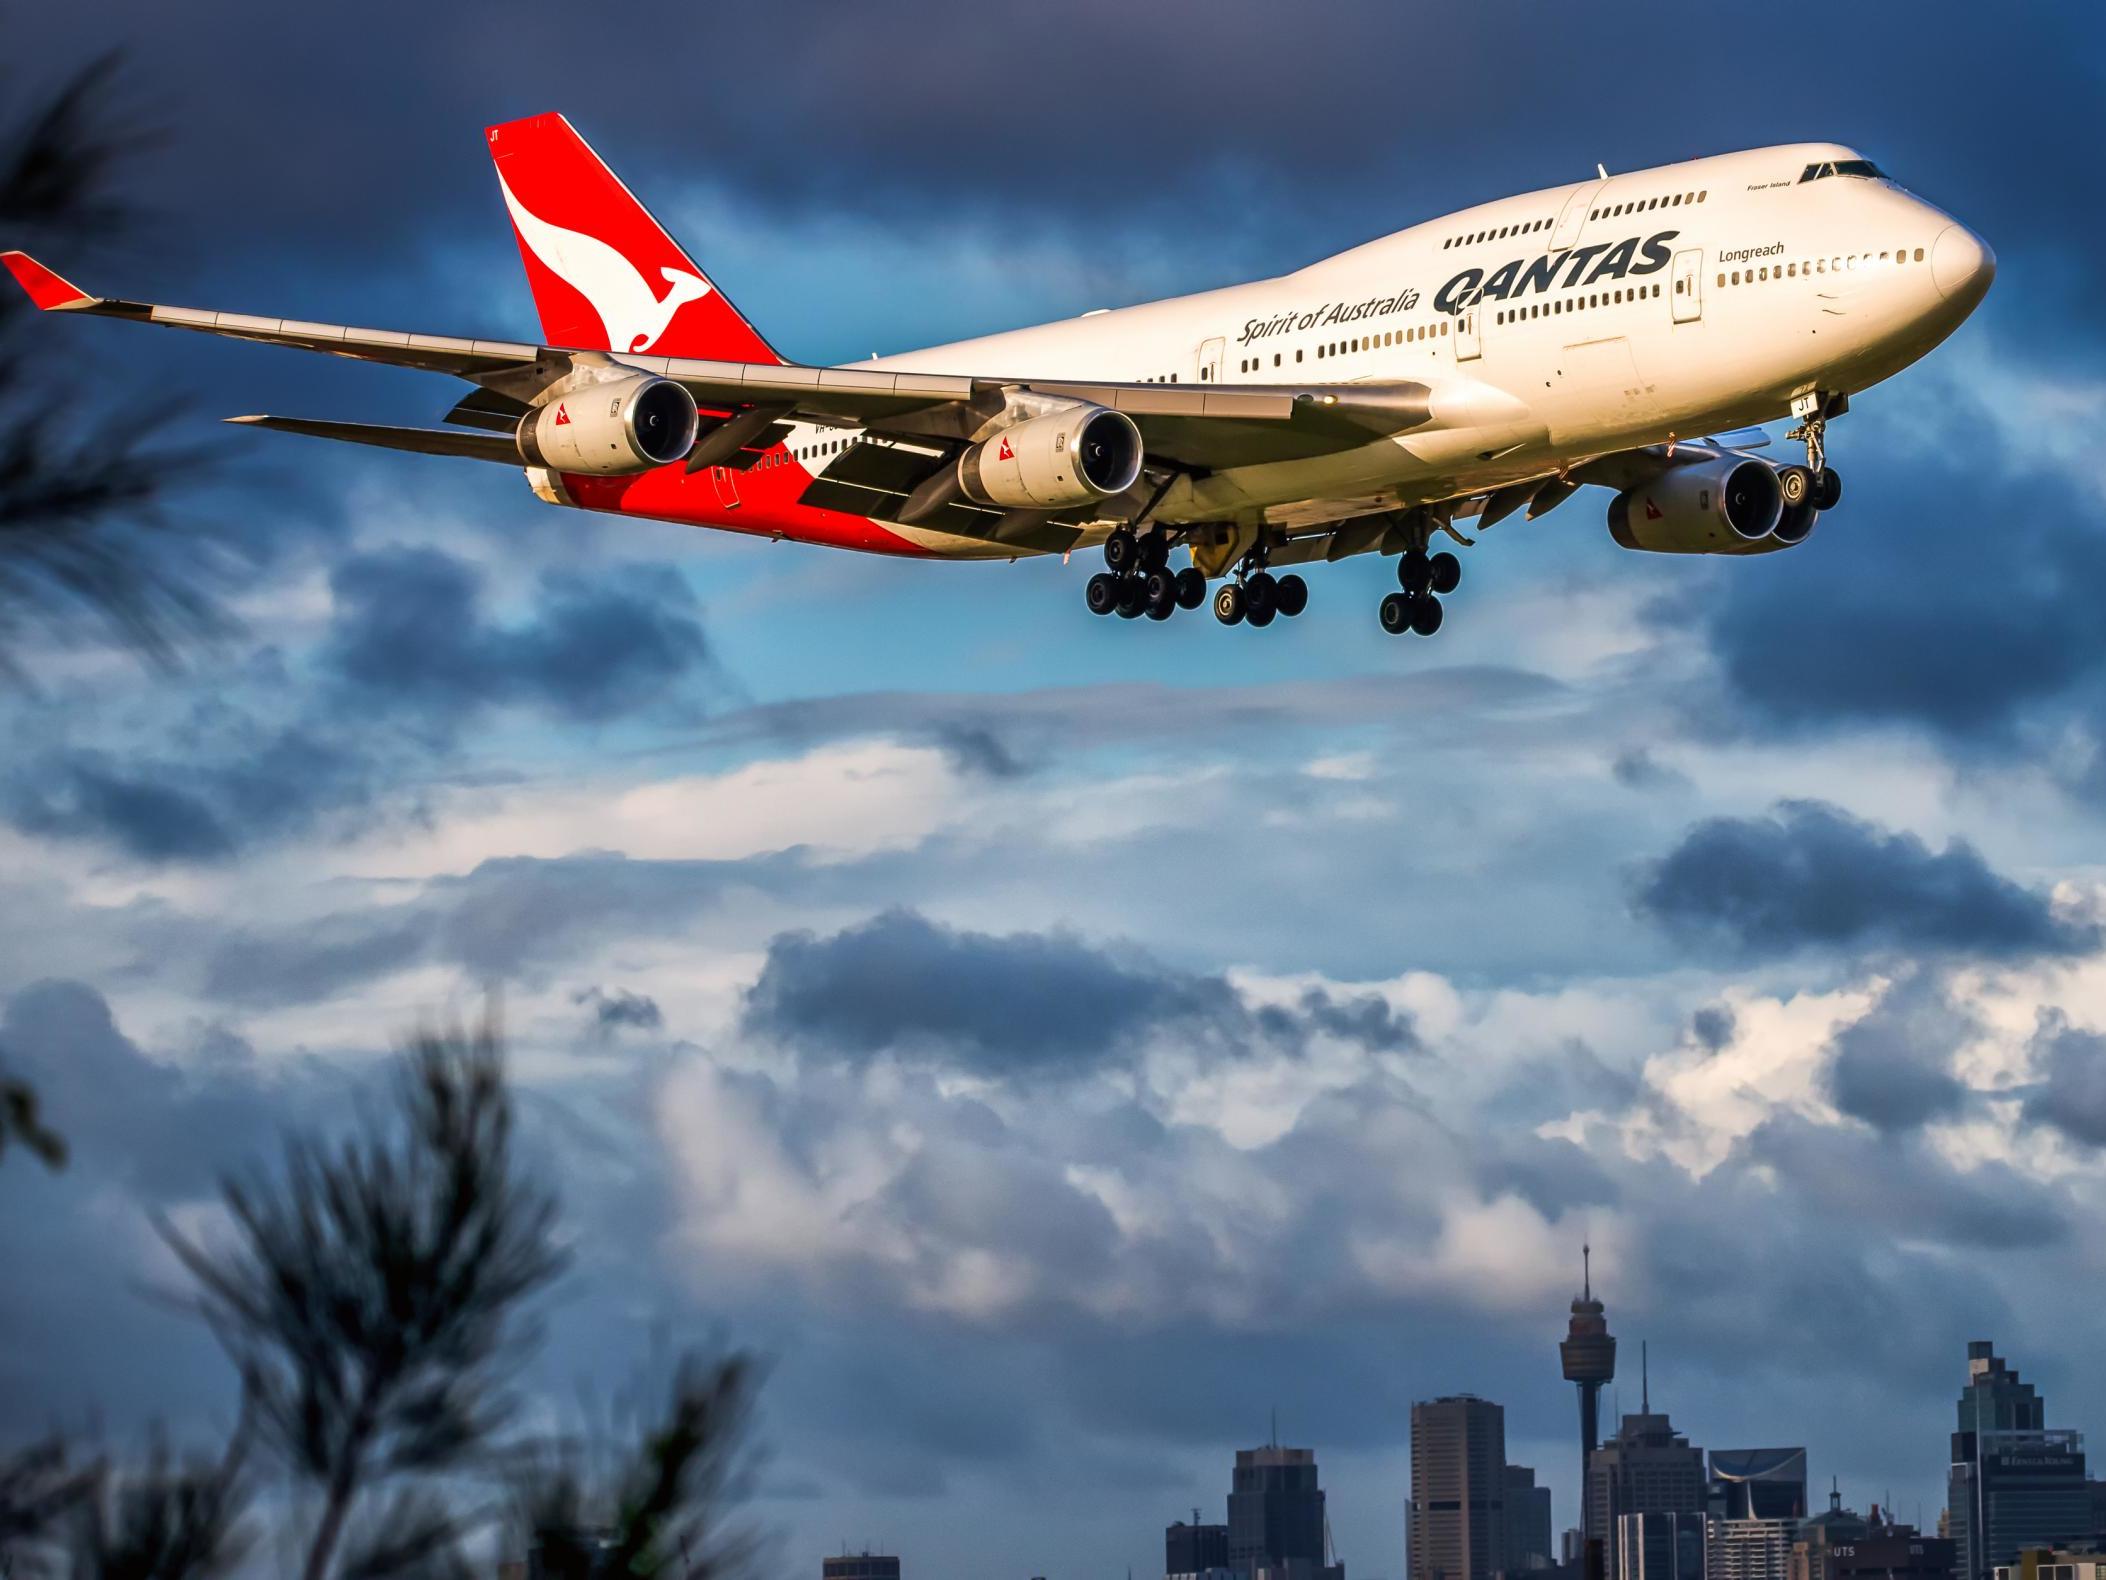 One plane engine was shut down during a Qantas flight, causing commotion among passengers